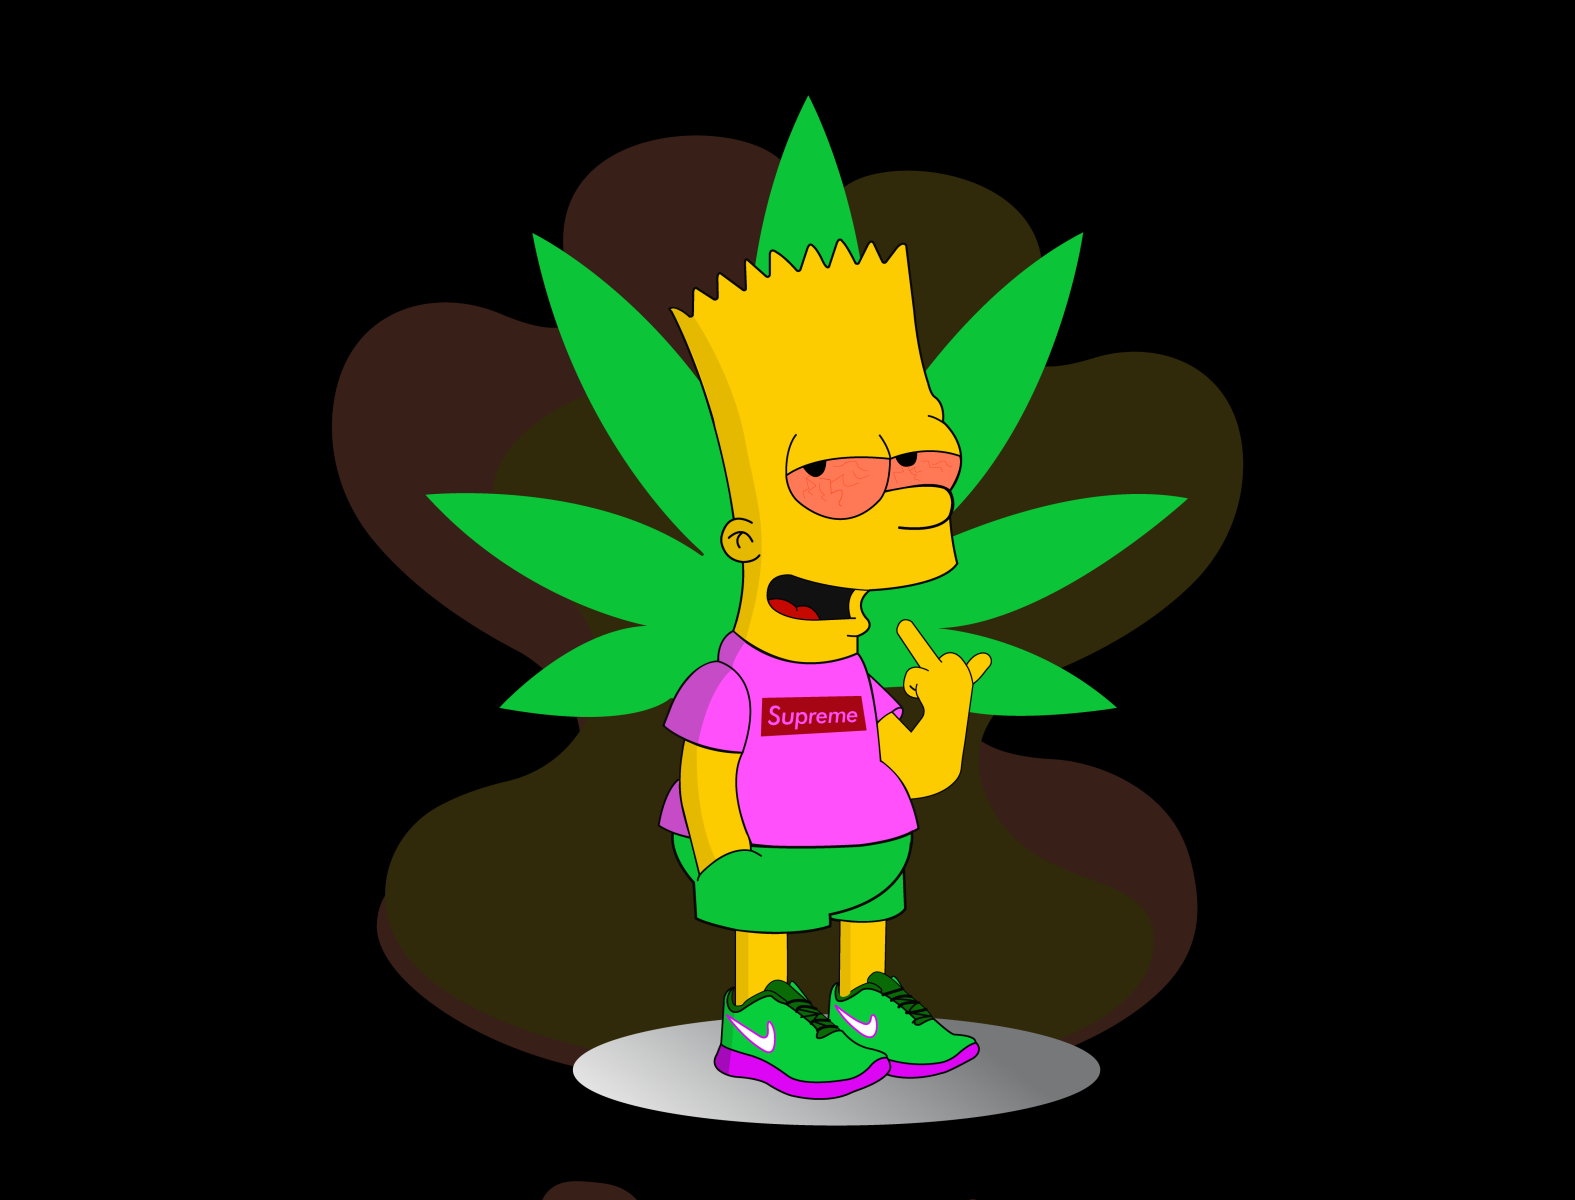 Bart Simpson in his element. by Rahul Gupta on Dribbble